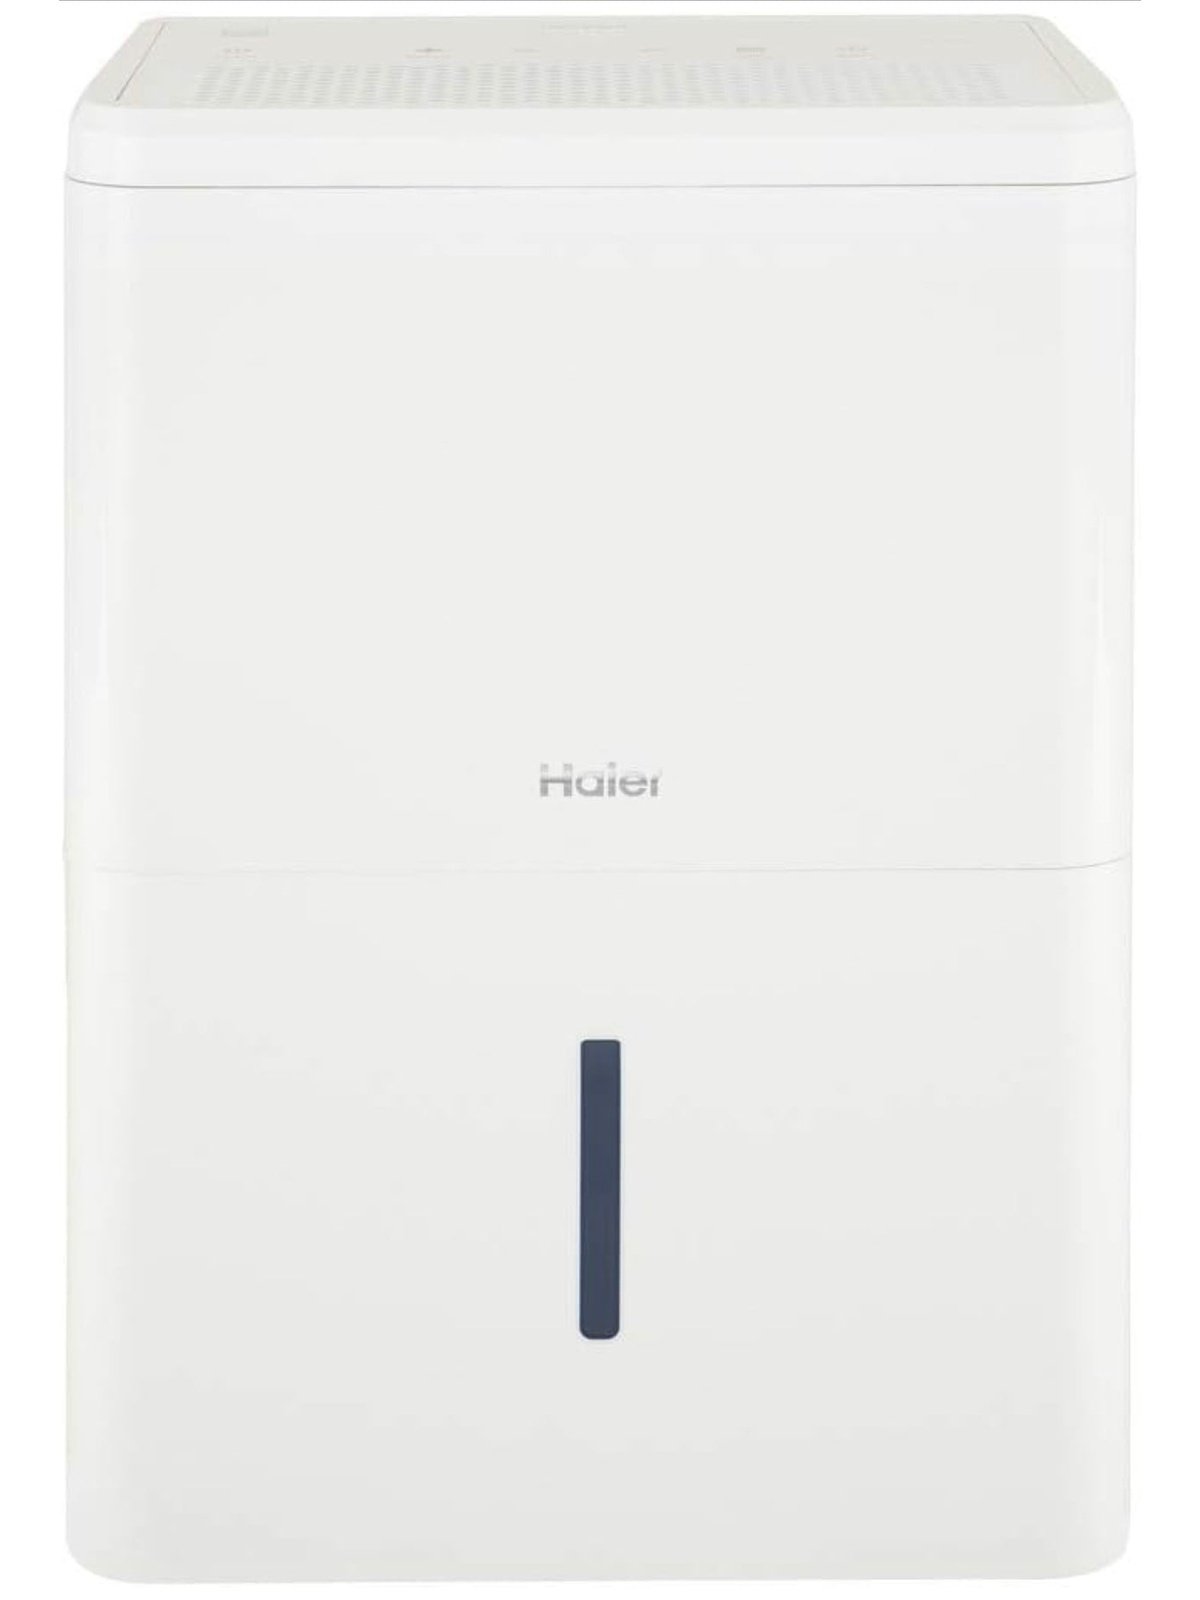 Haier 35 Pint Portable Dehumidifier, Perfect for Bedroom, Basement & Garage, For High Humidity or Very Damp Areas, Empty Bucket Alarm, Clean Filter Alert & LED Digital Controls, Energy Star, White